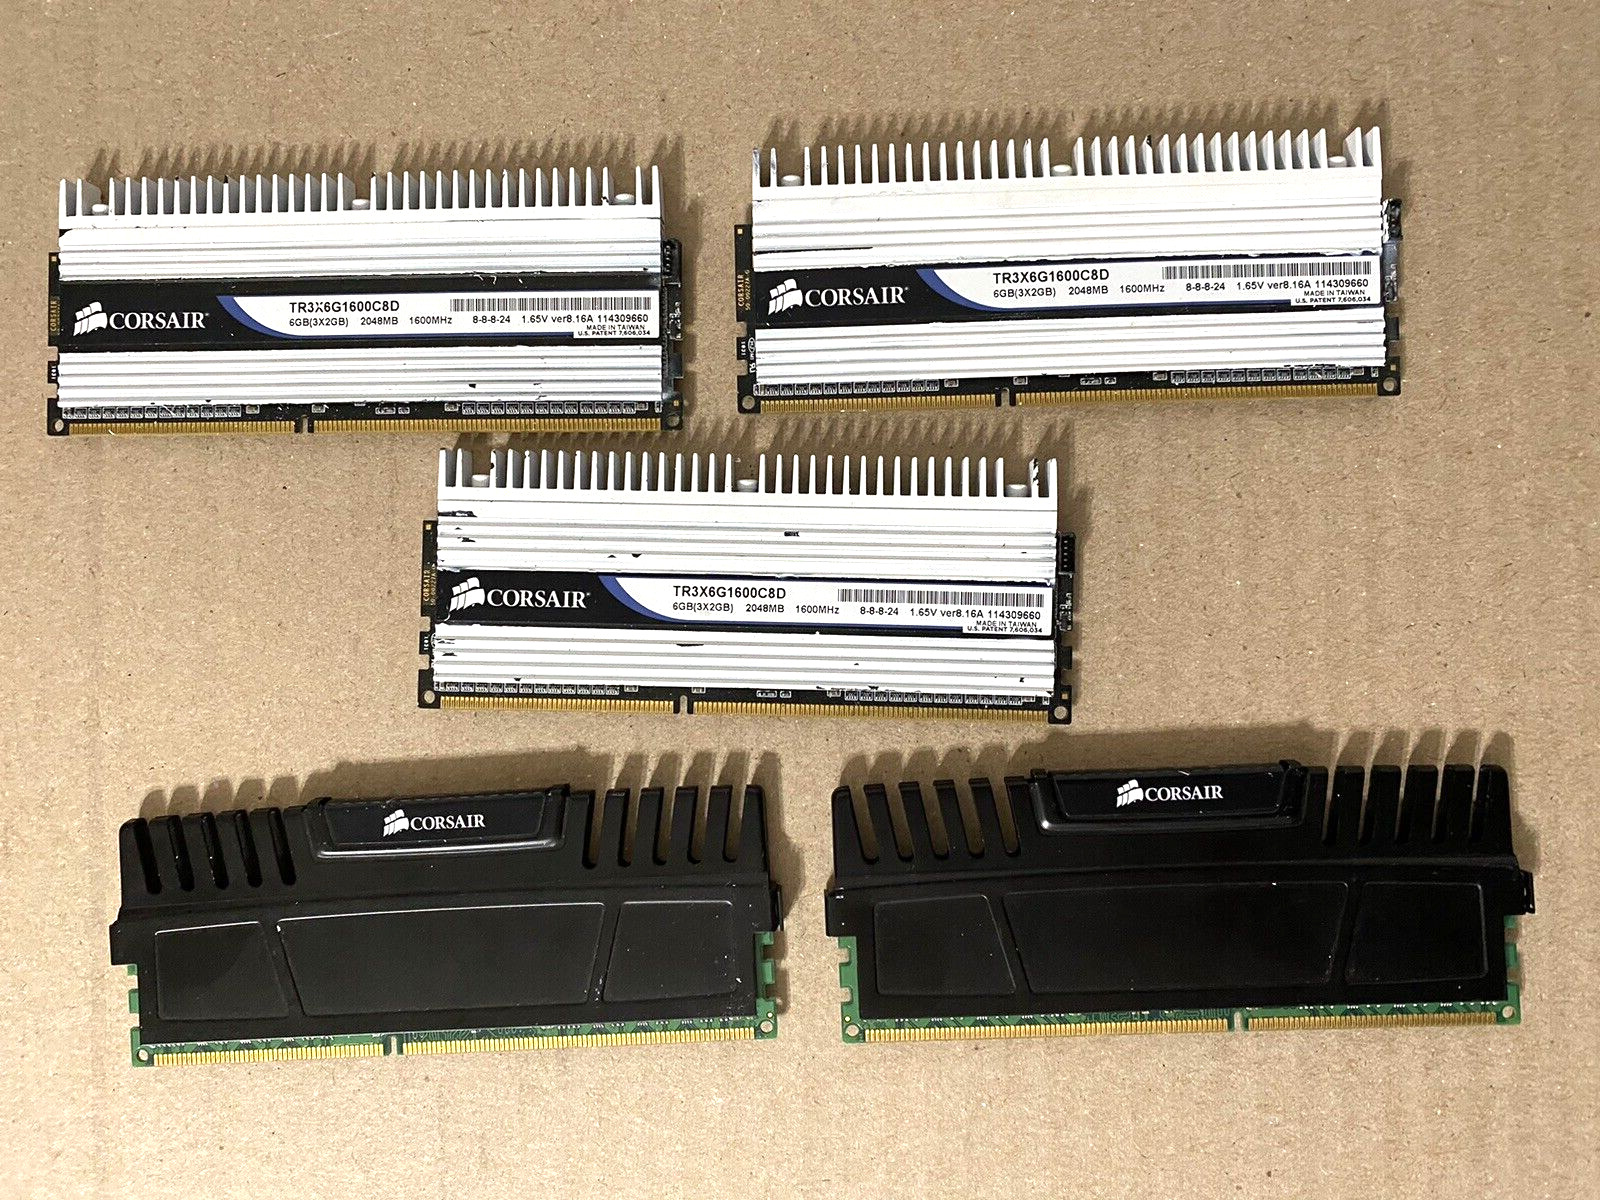 Lot of 5 Corsair Memory Modules AS-IS (See Photos)